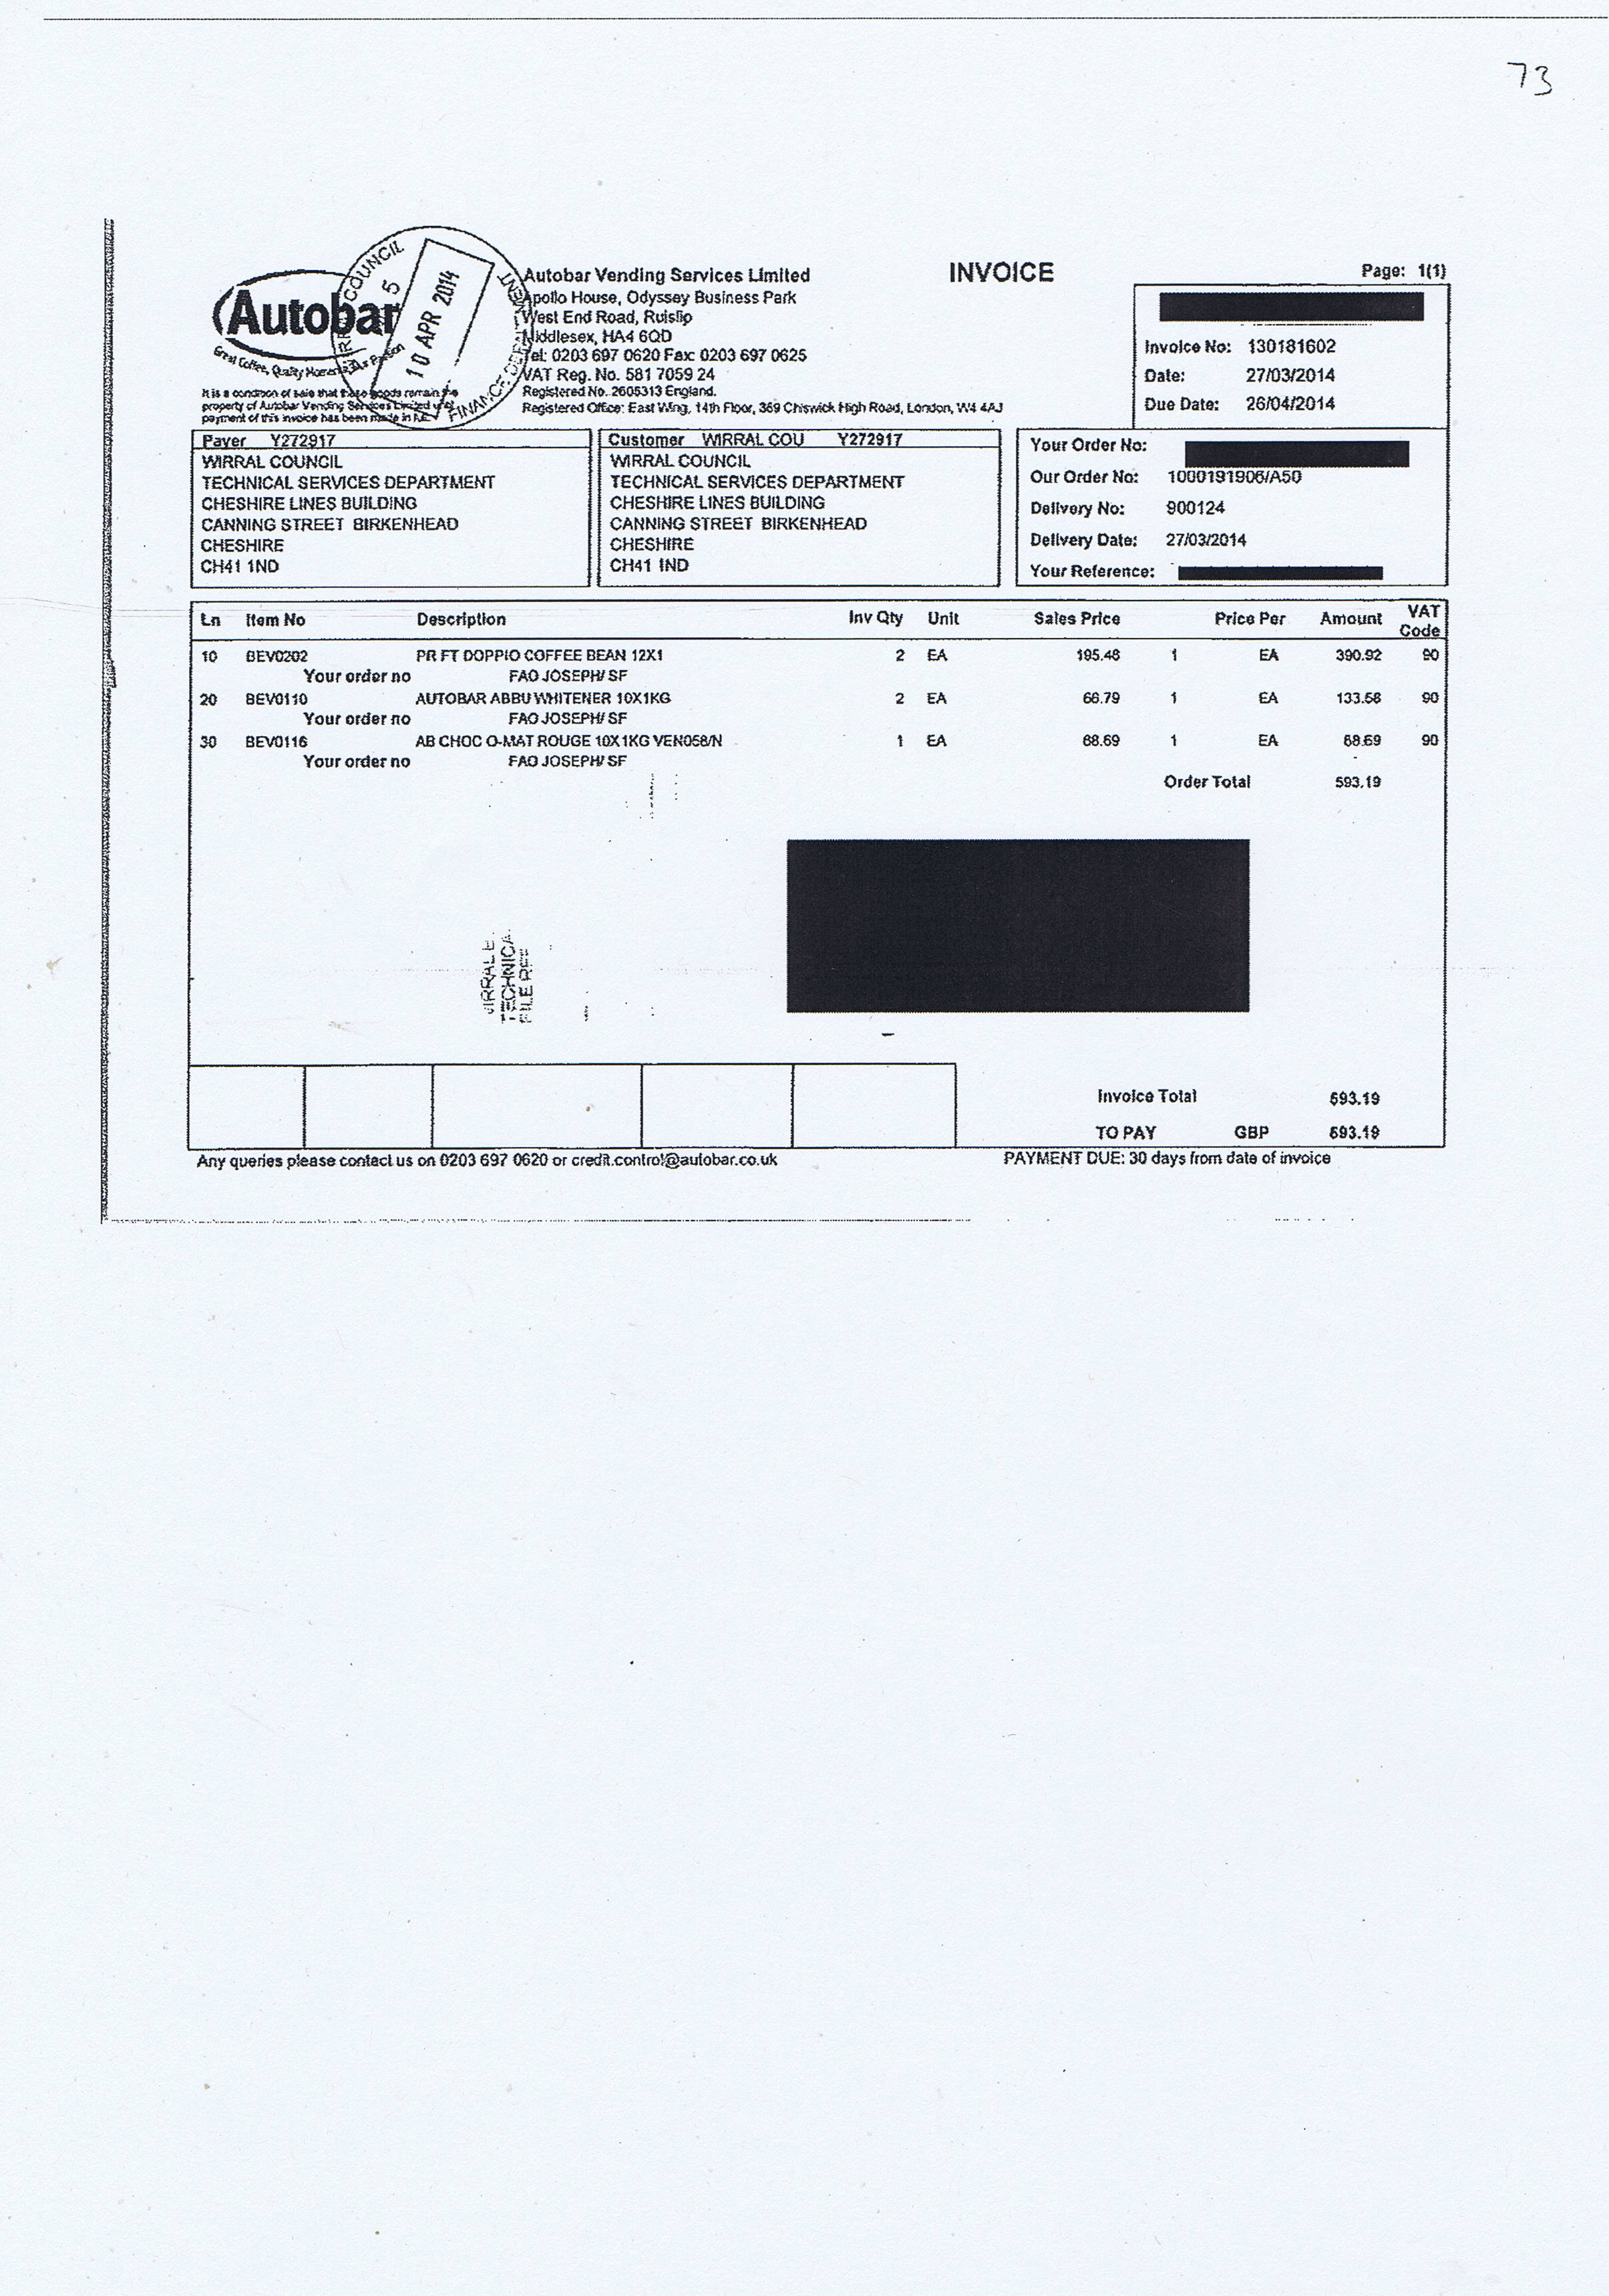 Wirral Council invoice 73 Autobar Vending Services Limited £593.19